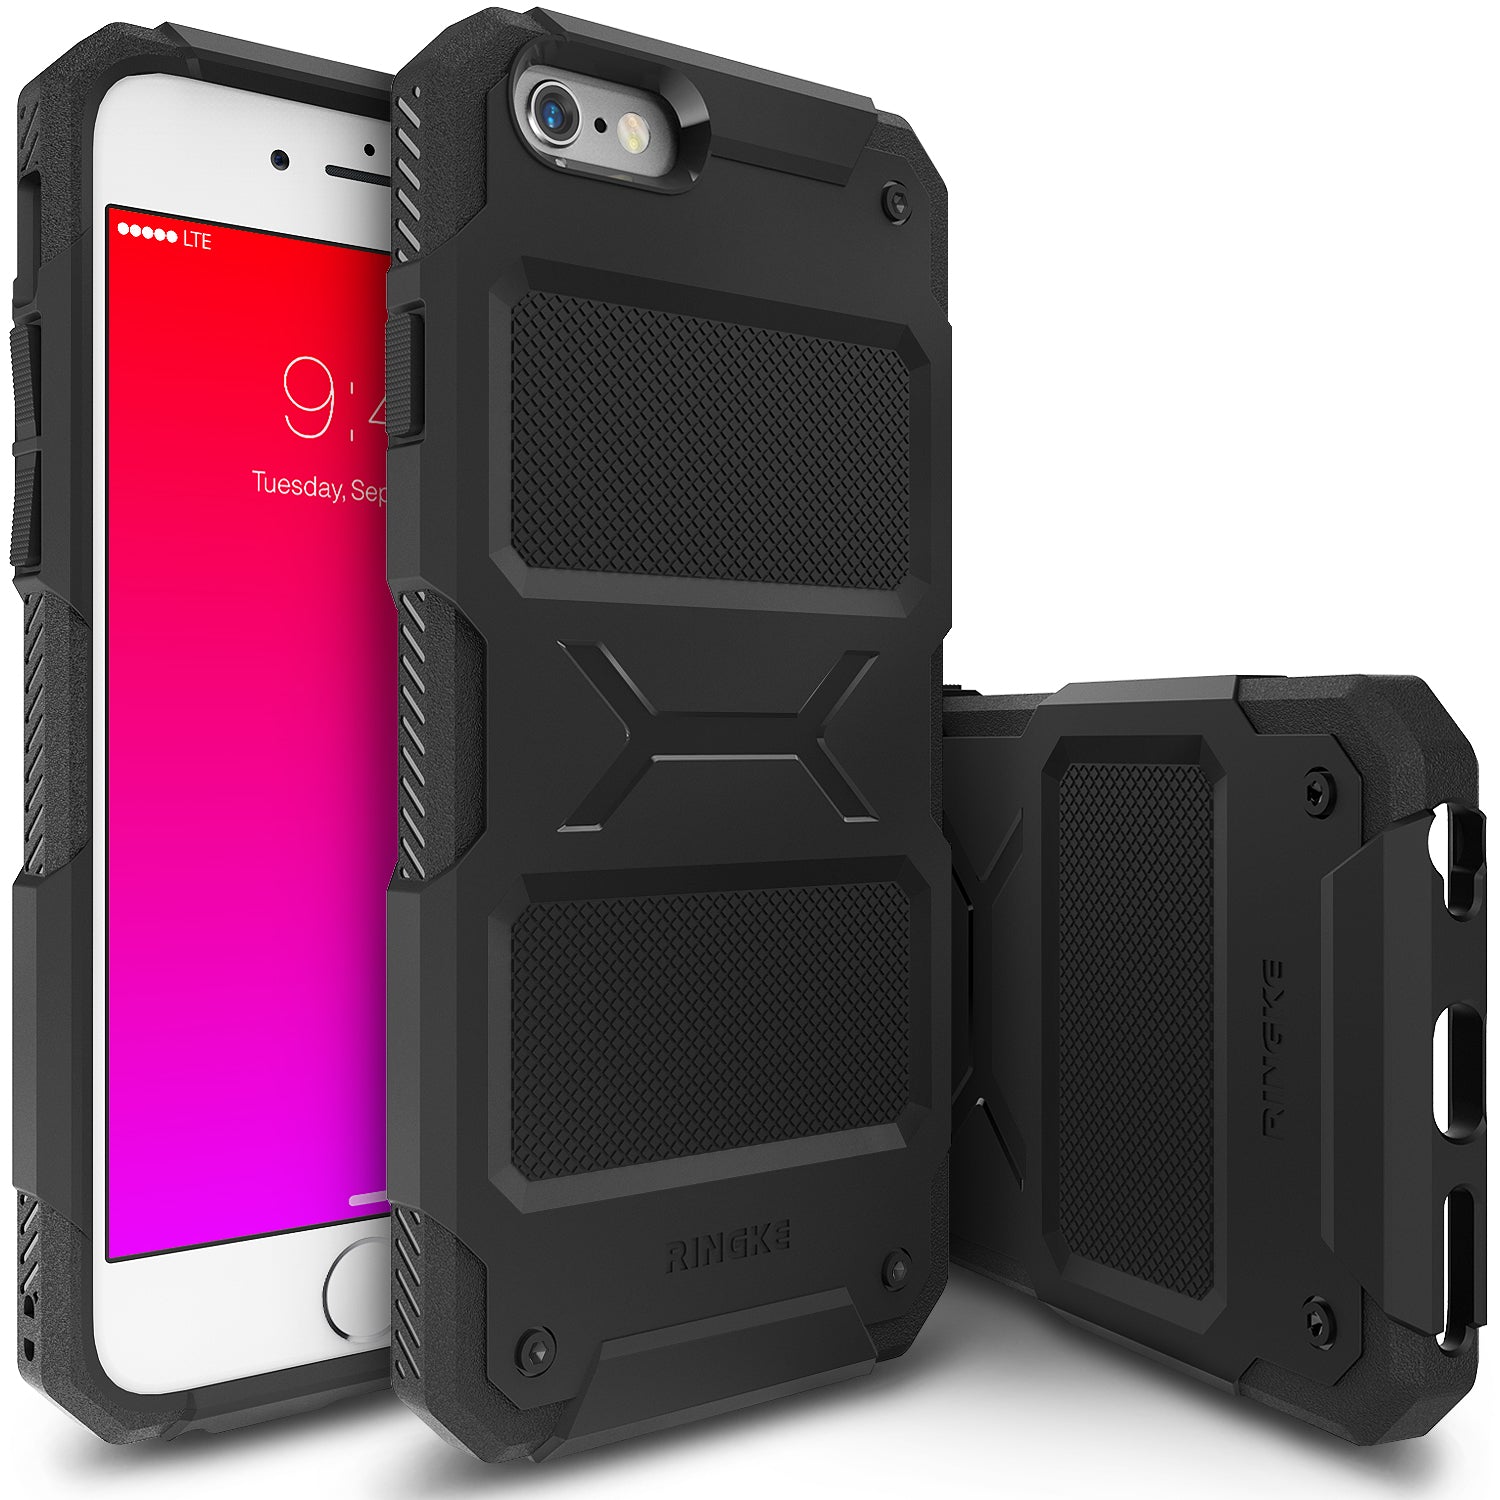 ringke rebel rugged heavy duty protective case cover for iphone 6 plus 6s plus main black